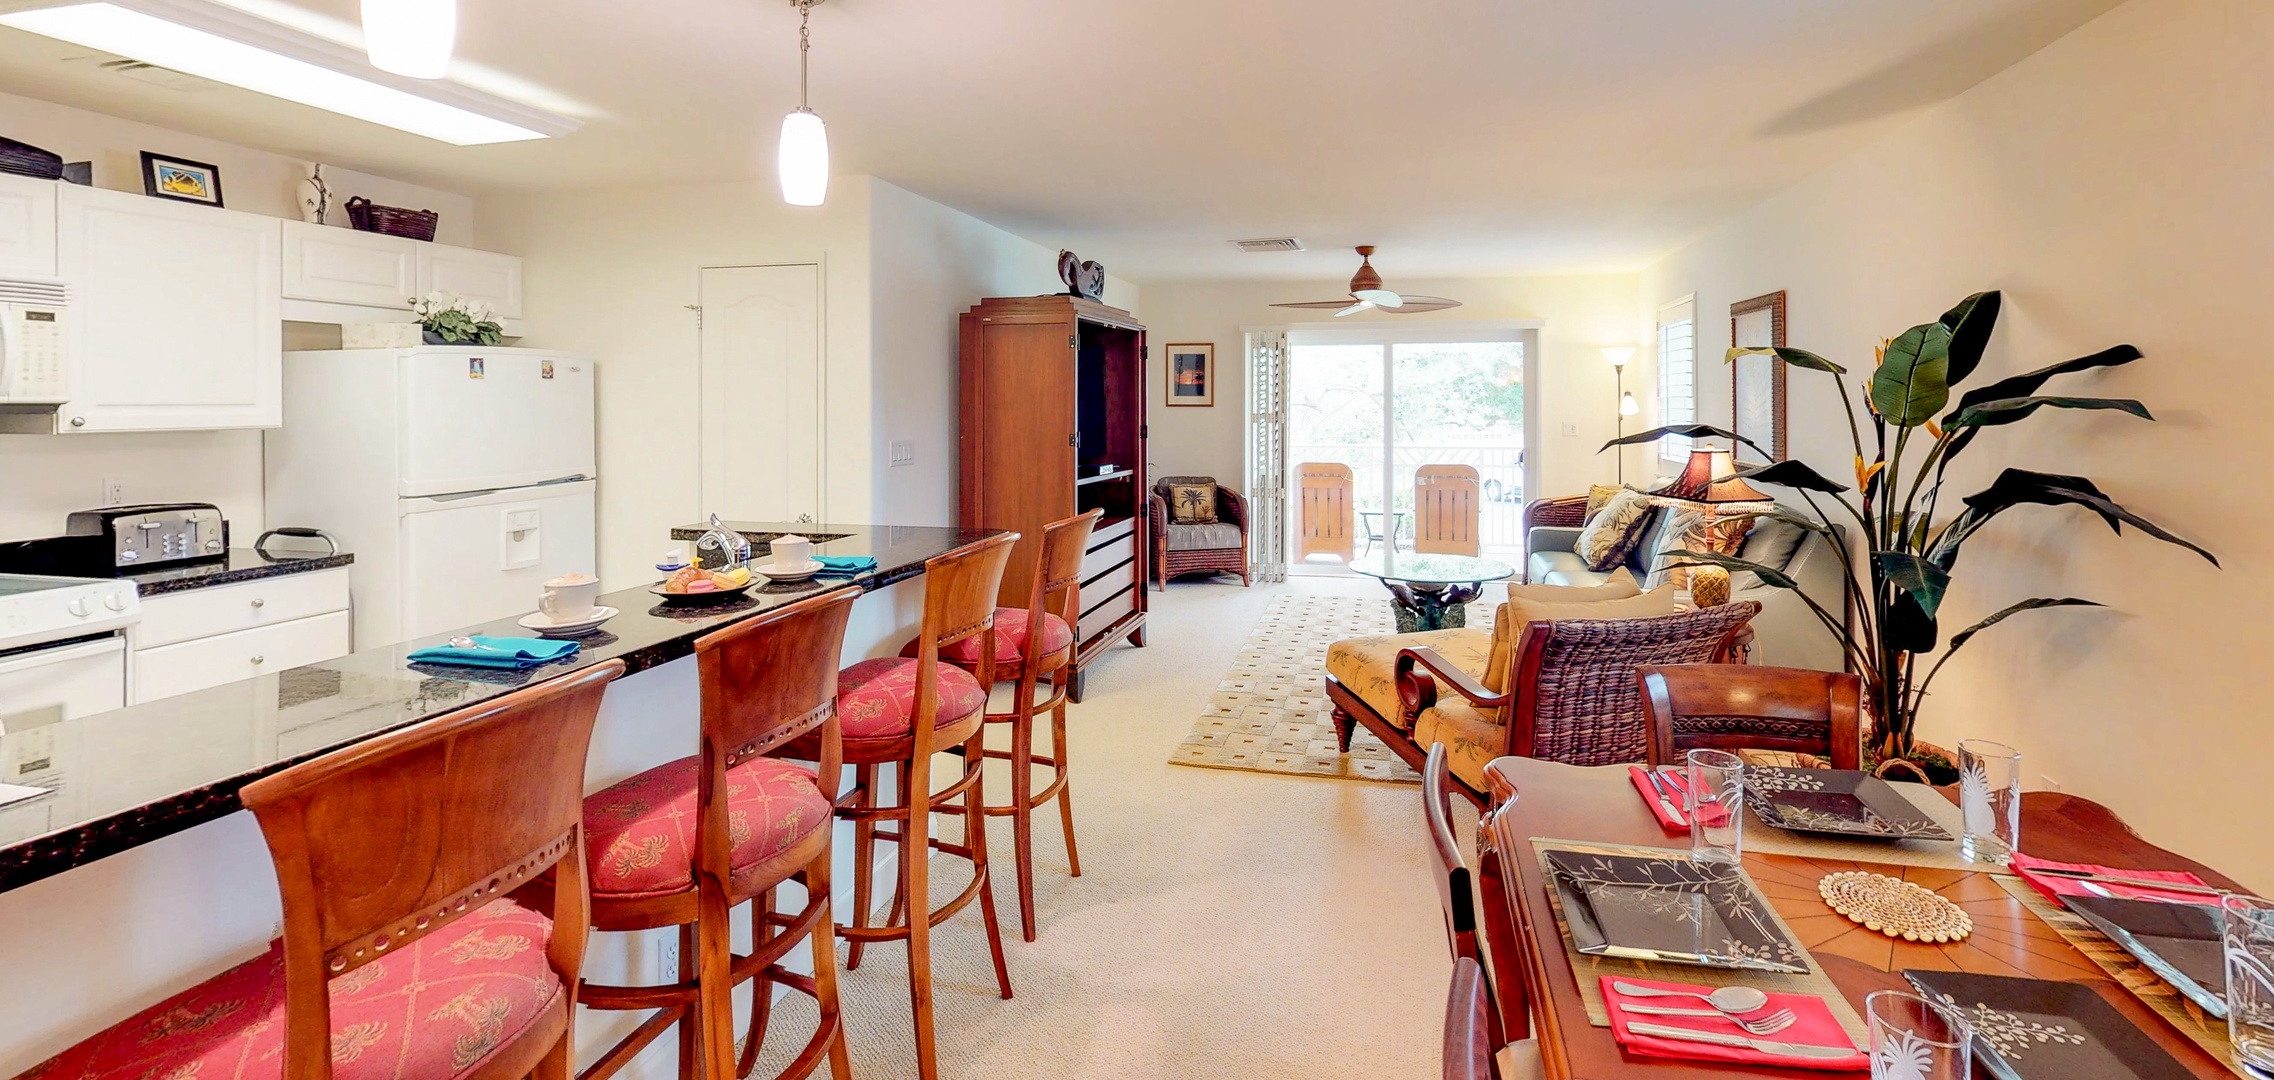 Kapolei Vacation Rentals, Ko Olina Kai 1105E - A welcoming home designed for family time, featuring an open floorplan that connects dining, kitchen, and living areas, all leading to the lanai.